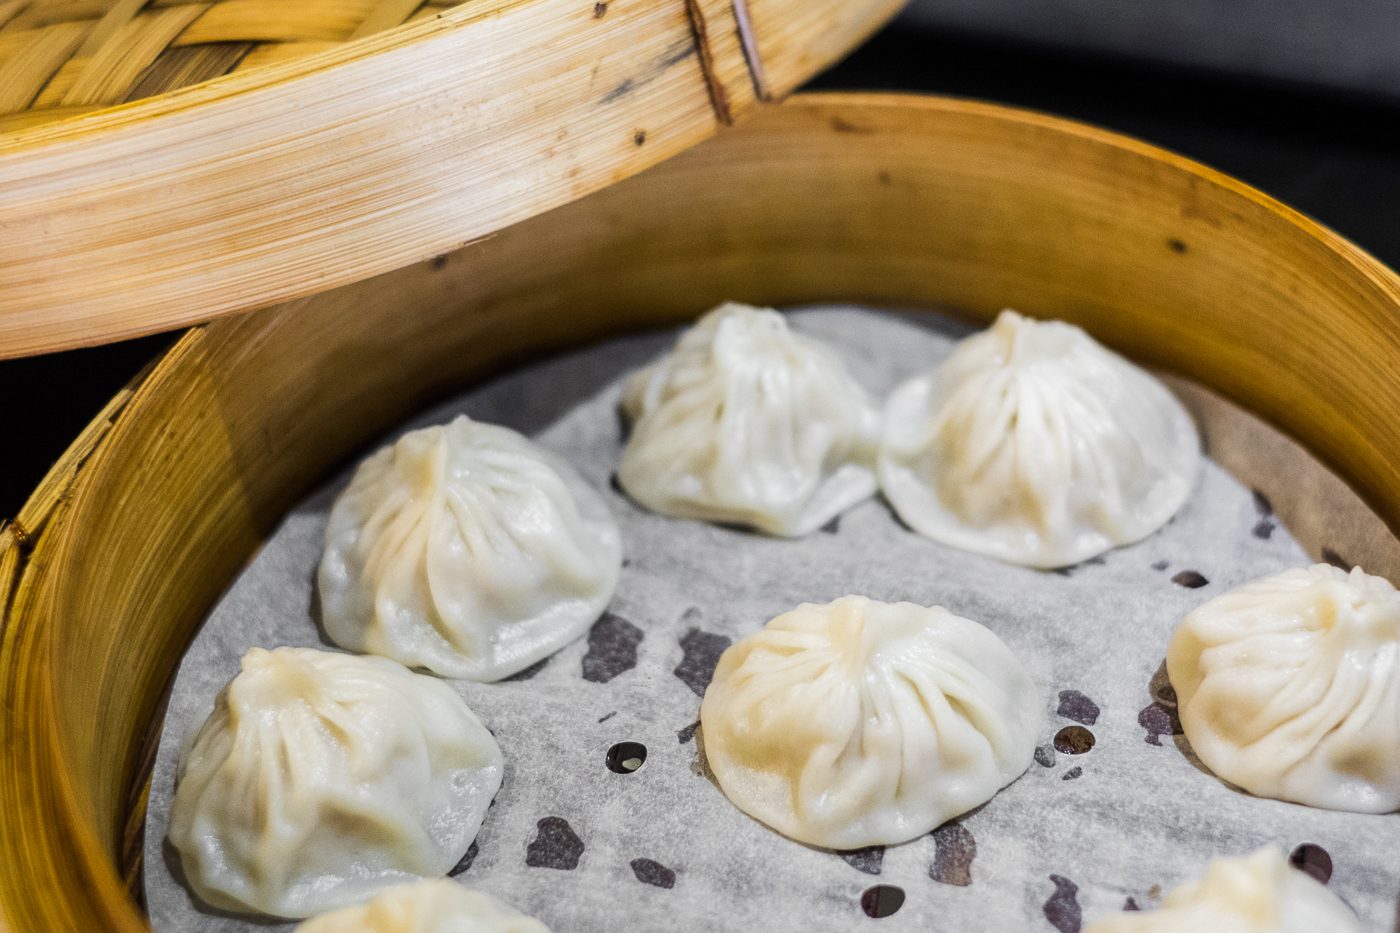 Tien Ma's Xiao Long Bao sells for P200 for 10 pieces. They also serve fried and crab roe Xiao Long Bao. 